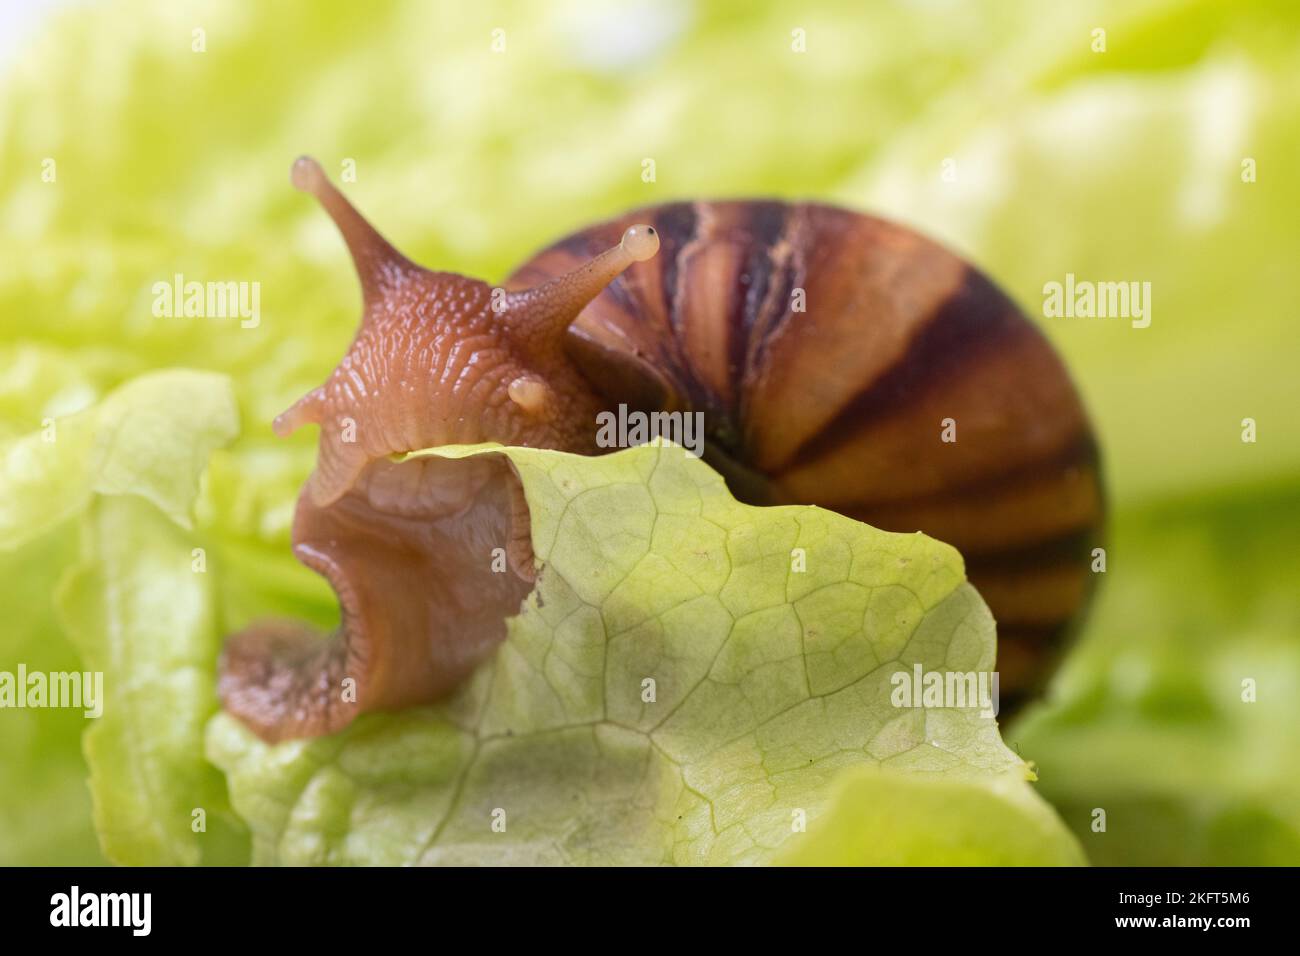 Little Achatina snail eating a lettuce or herb leaf, close-up, selective focus, copy space. Can be used to illustrate the harm of snails for gardening Stock Photo